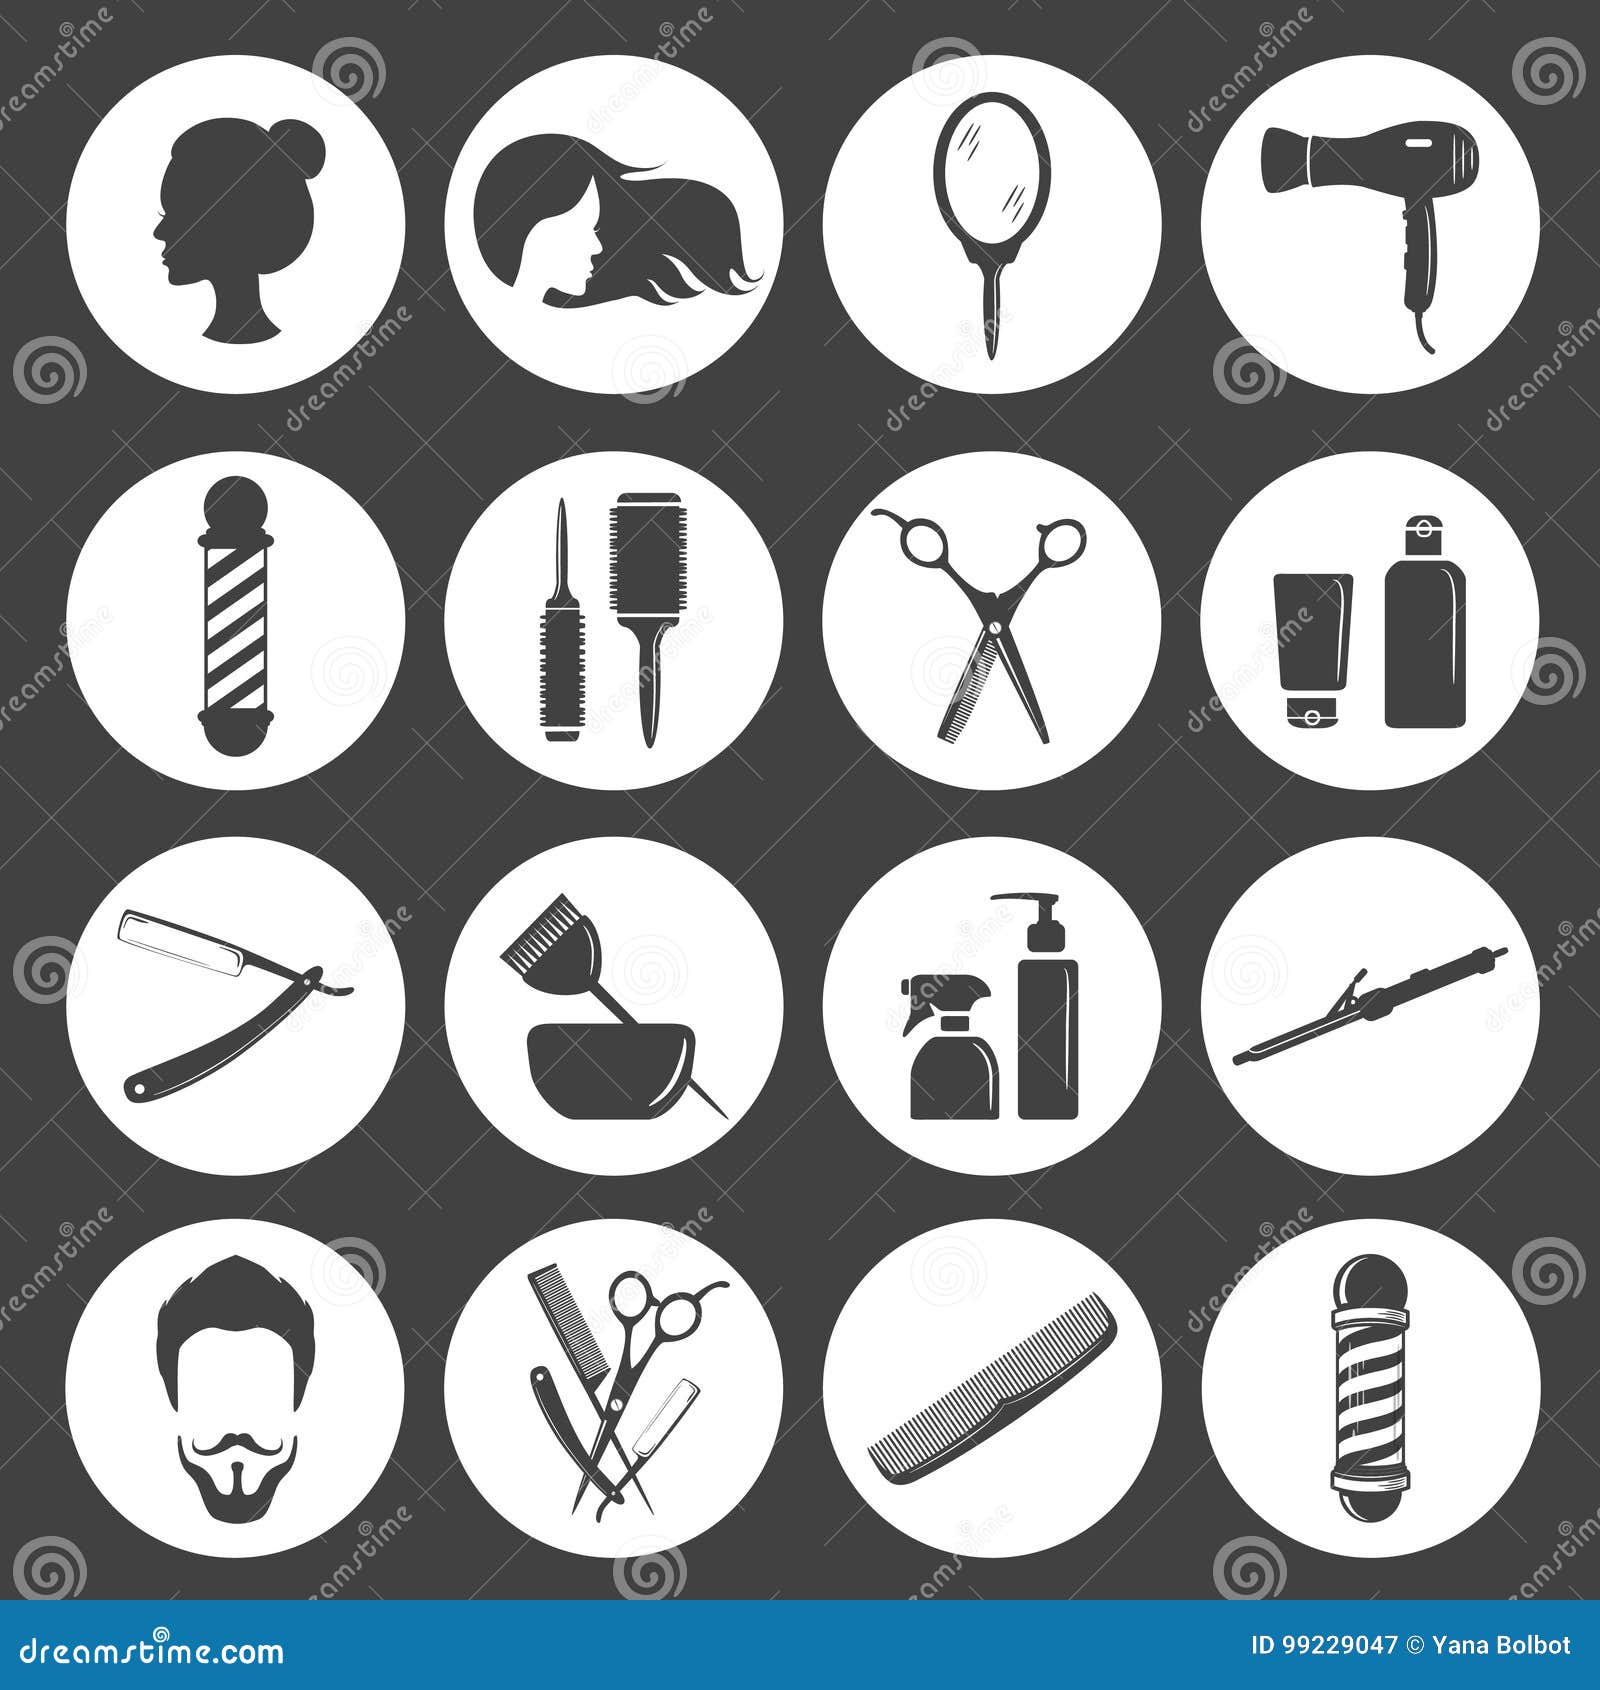 set of beauty hair salon or barbershop accessories icons